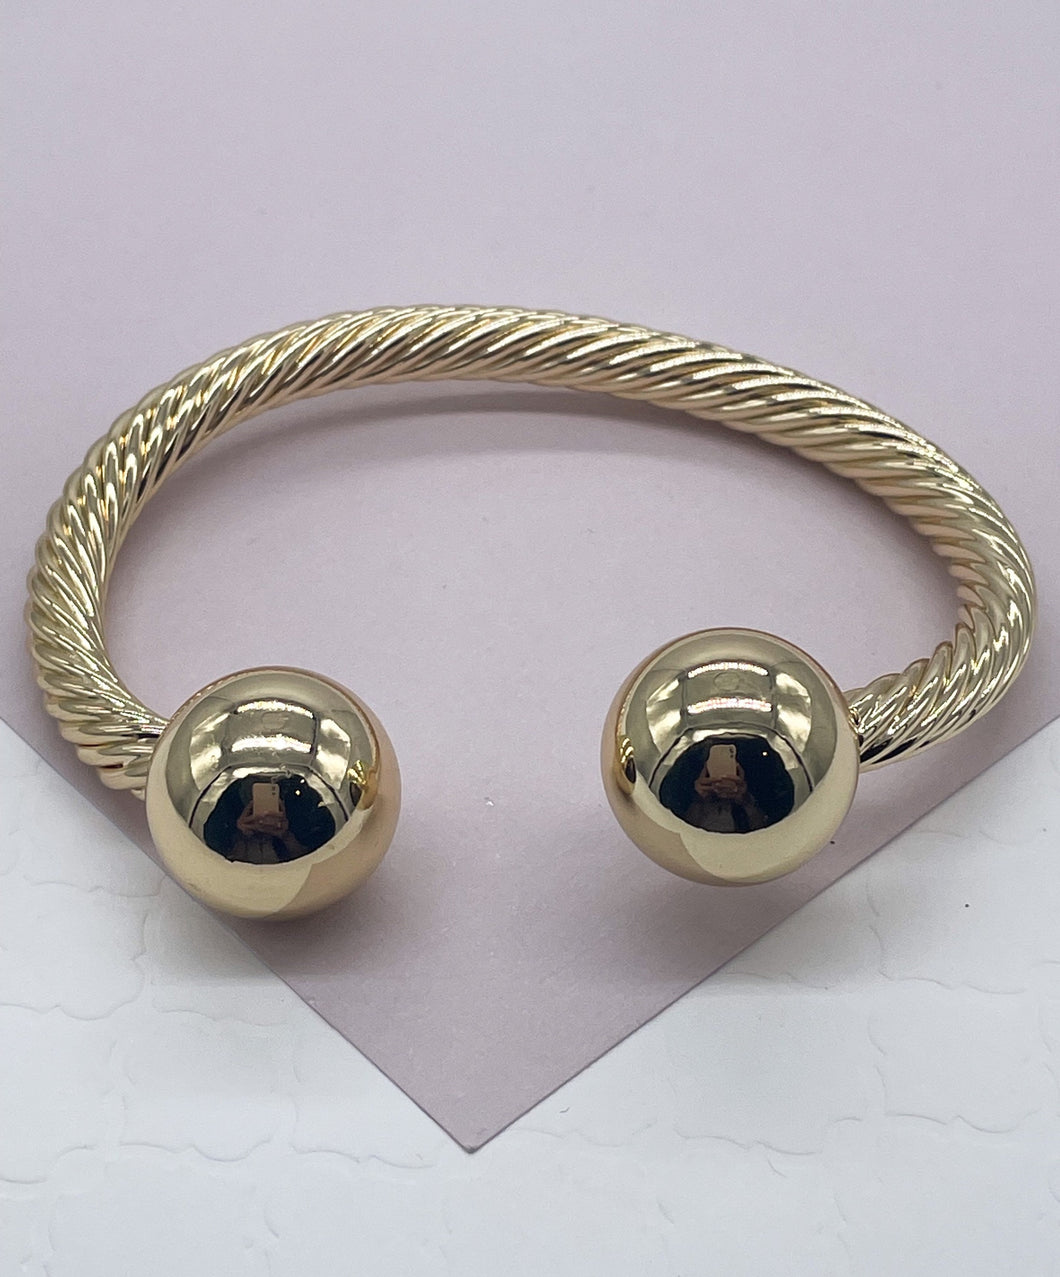 18k Gold Filled Twisted Bangle Featuring Two Solid Balls On Top Wholesale